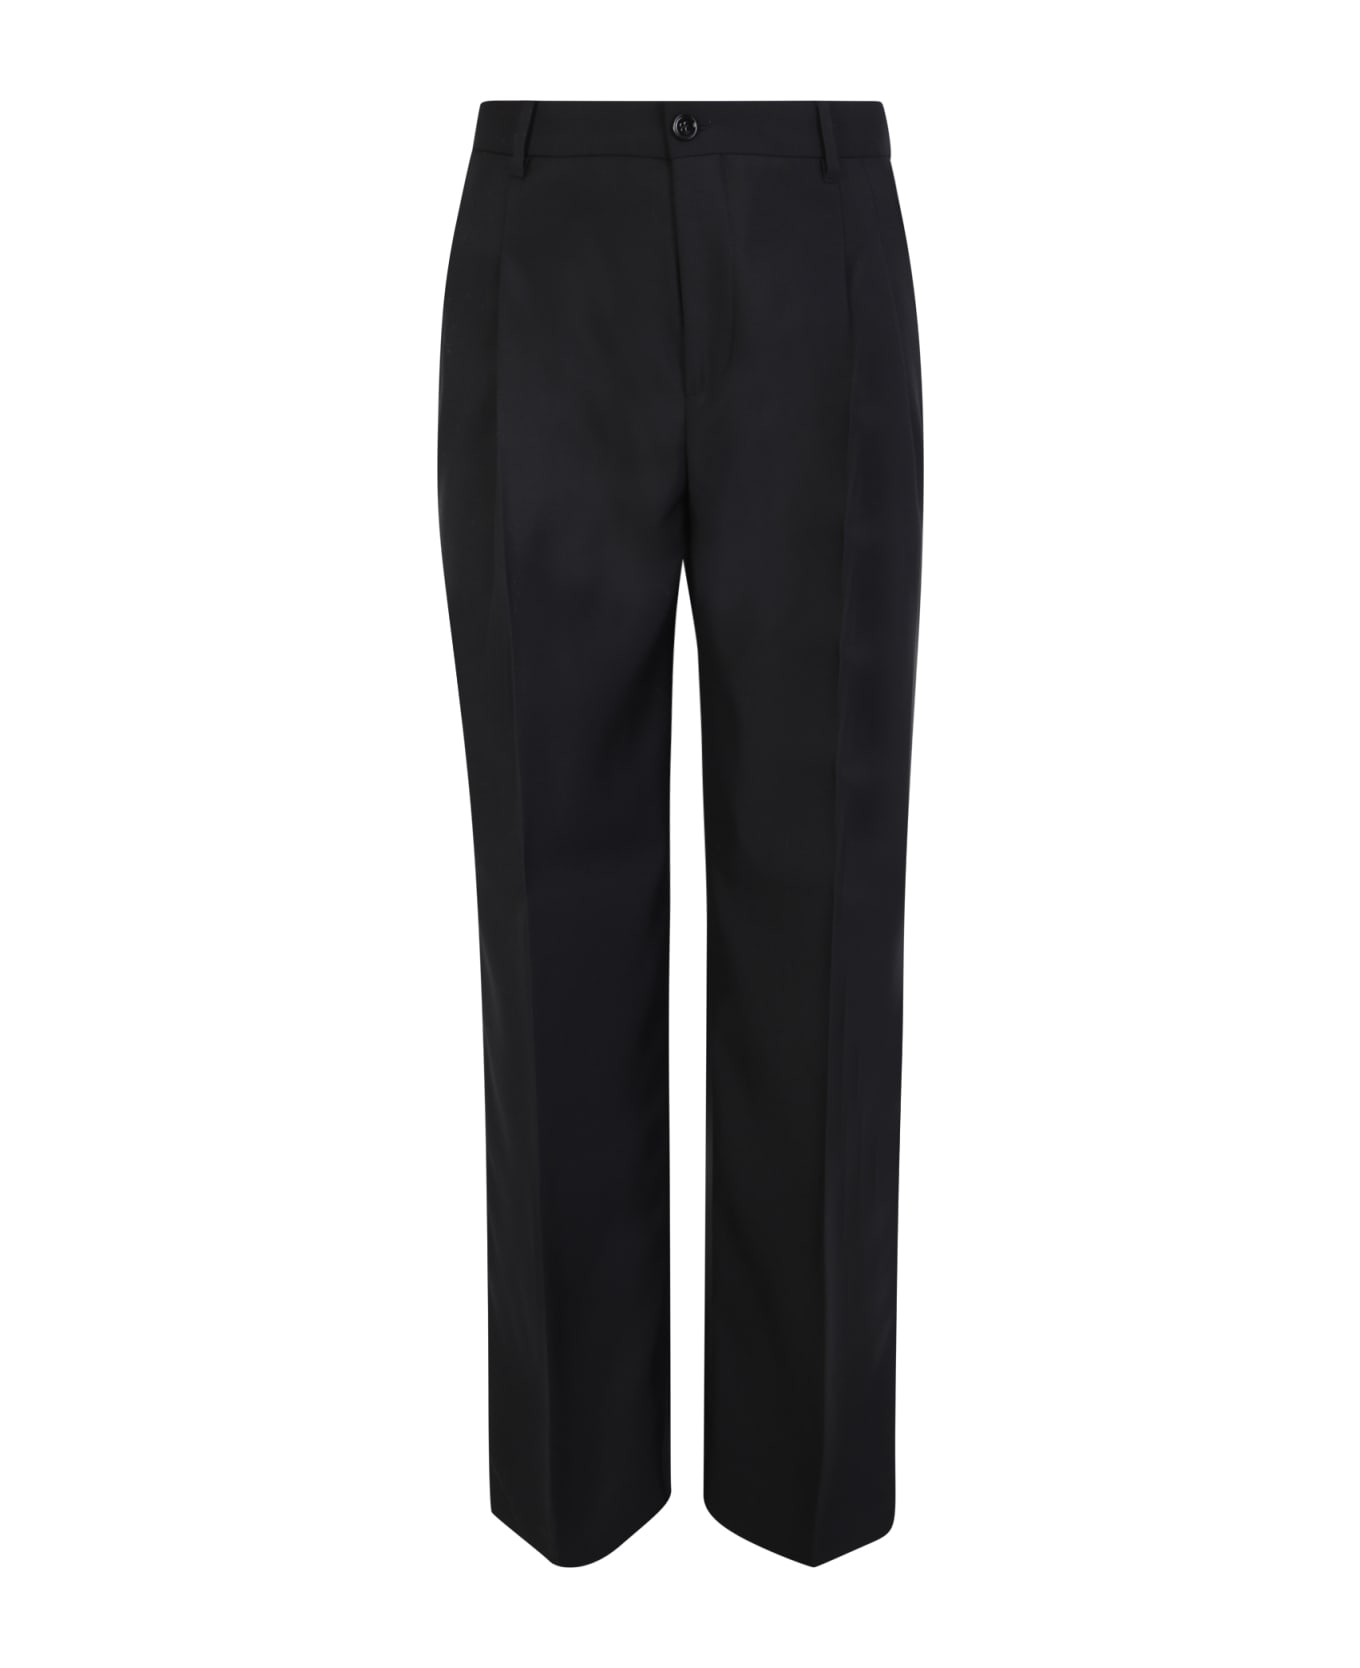 Burberry Black Tailored Trousers - Black